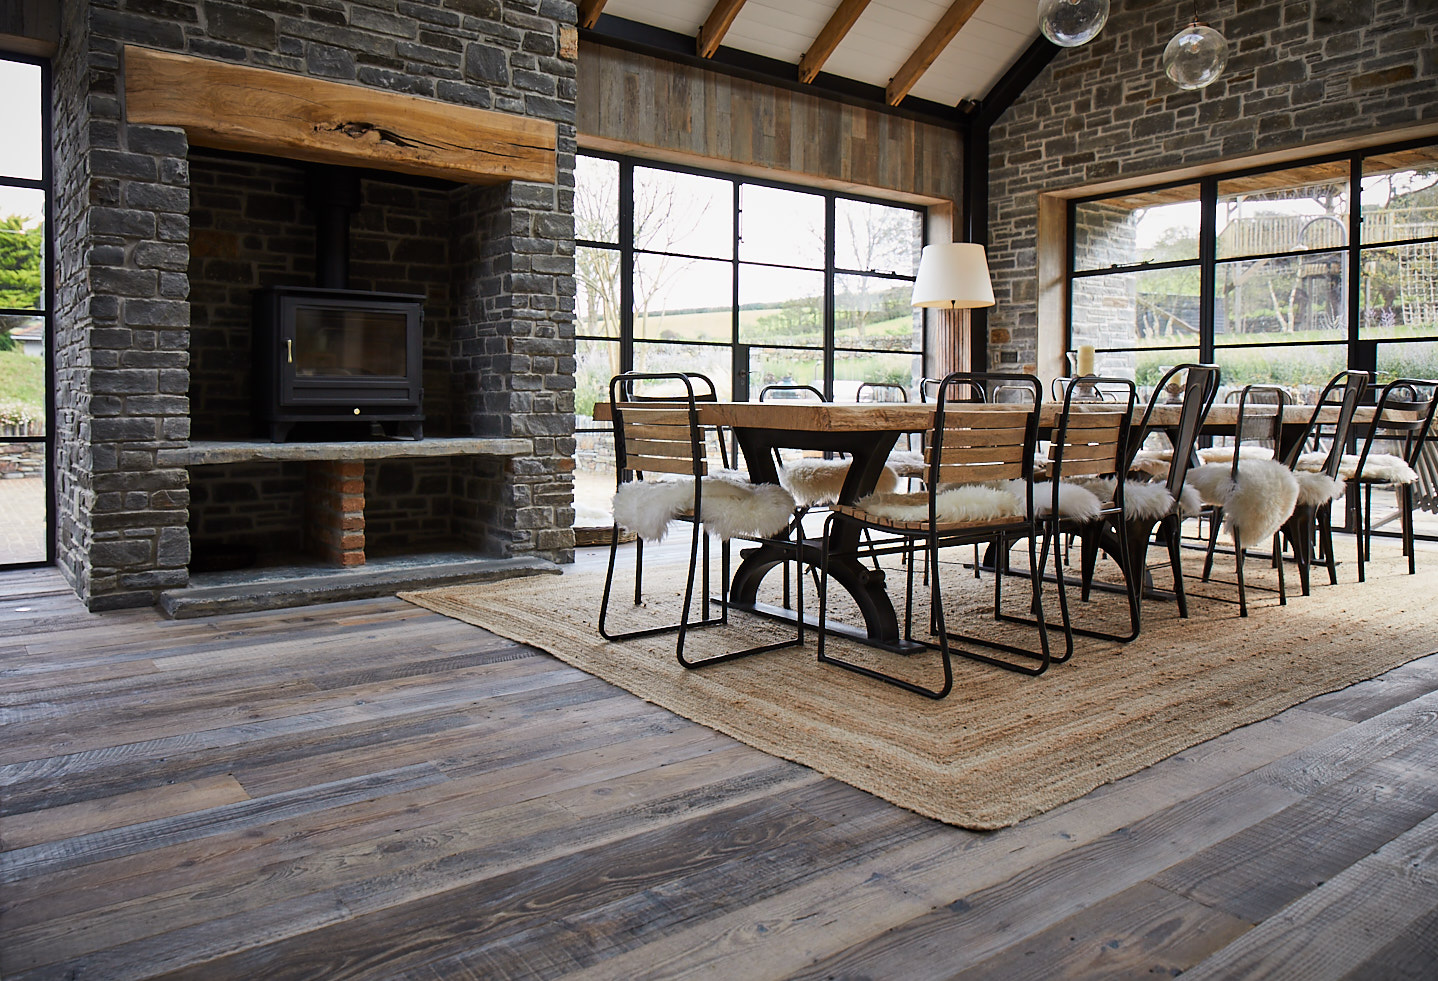 Reclaimed wood flooring with large open fireplace and dining table and chairs